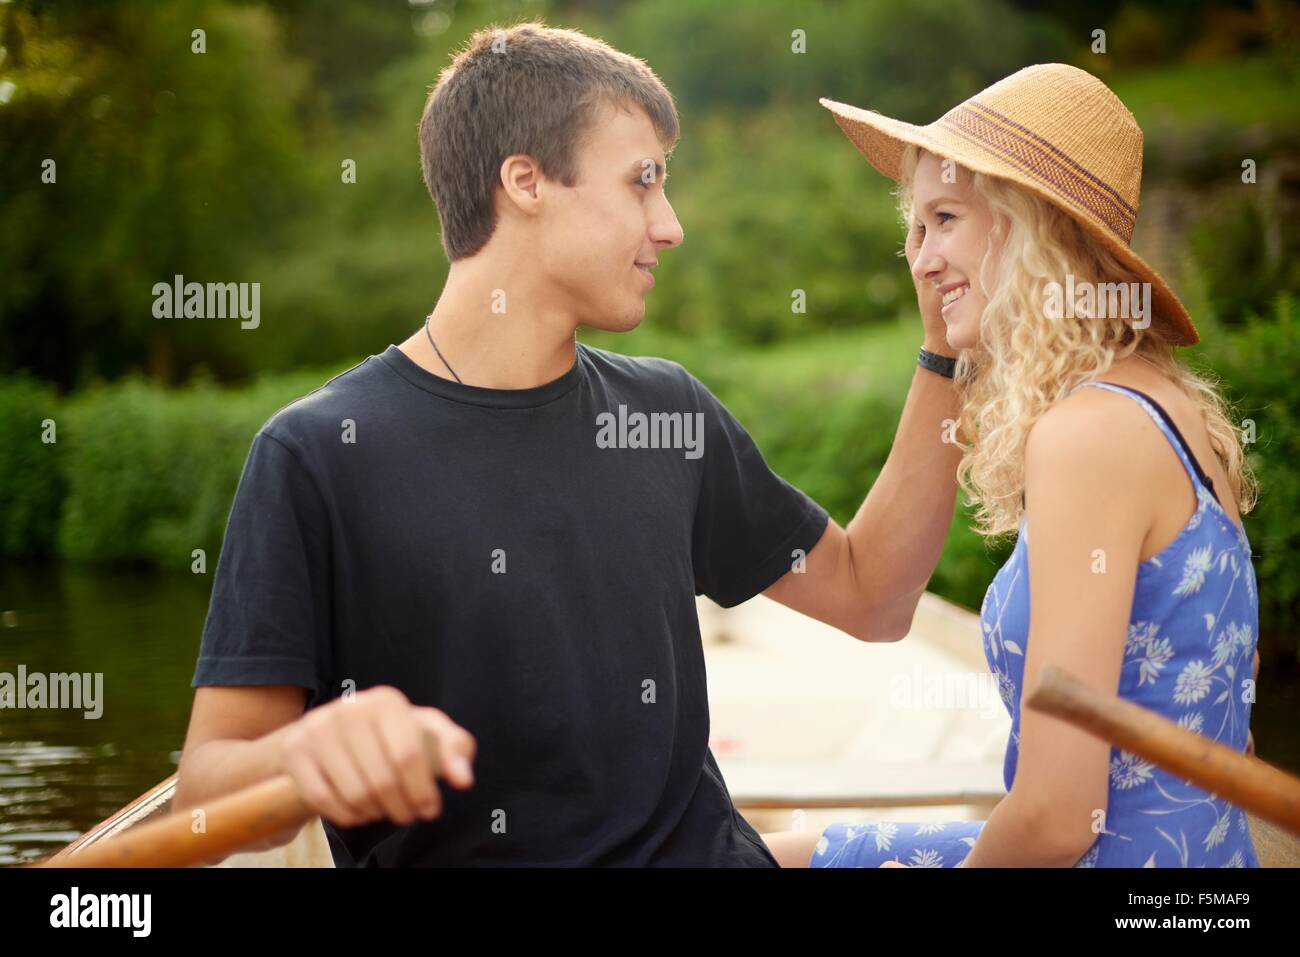 Romantic young couple rowing boat on rural river Stock Photo